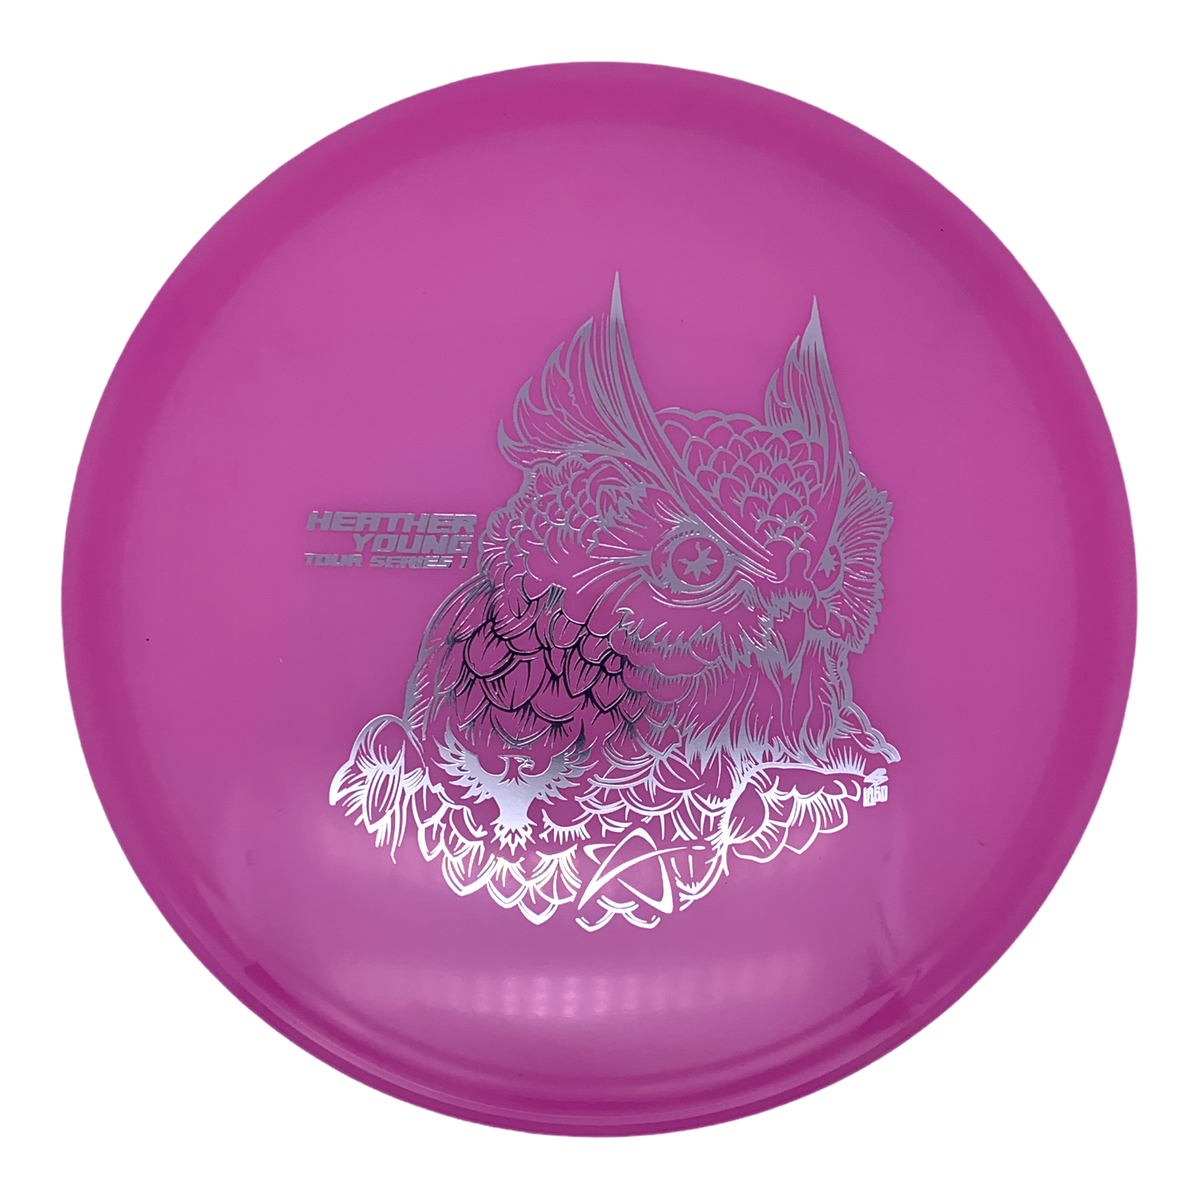 Prodigy Color Glow 400 A3 - Heather Young 2022 Tour Series